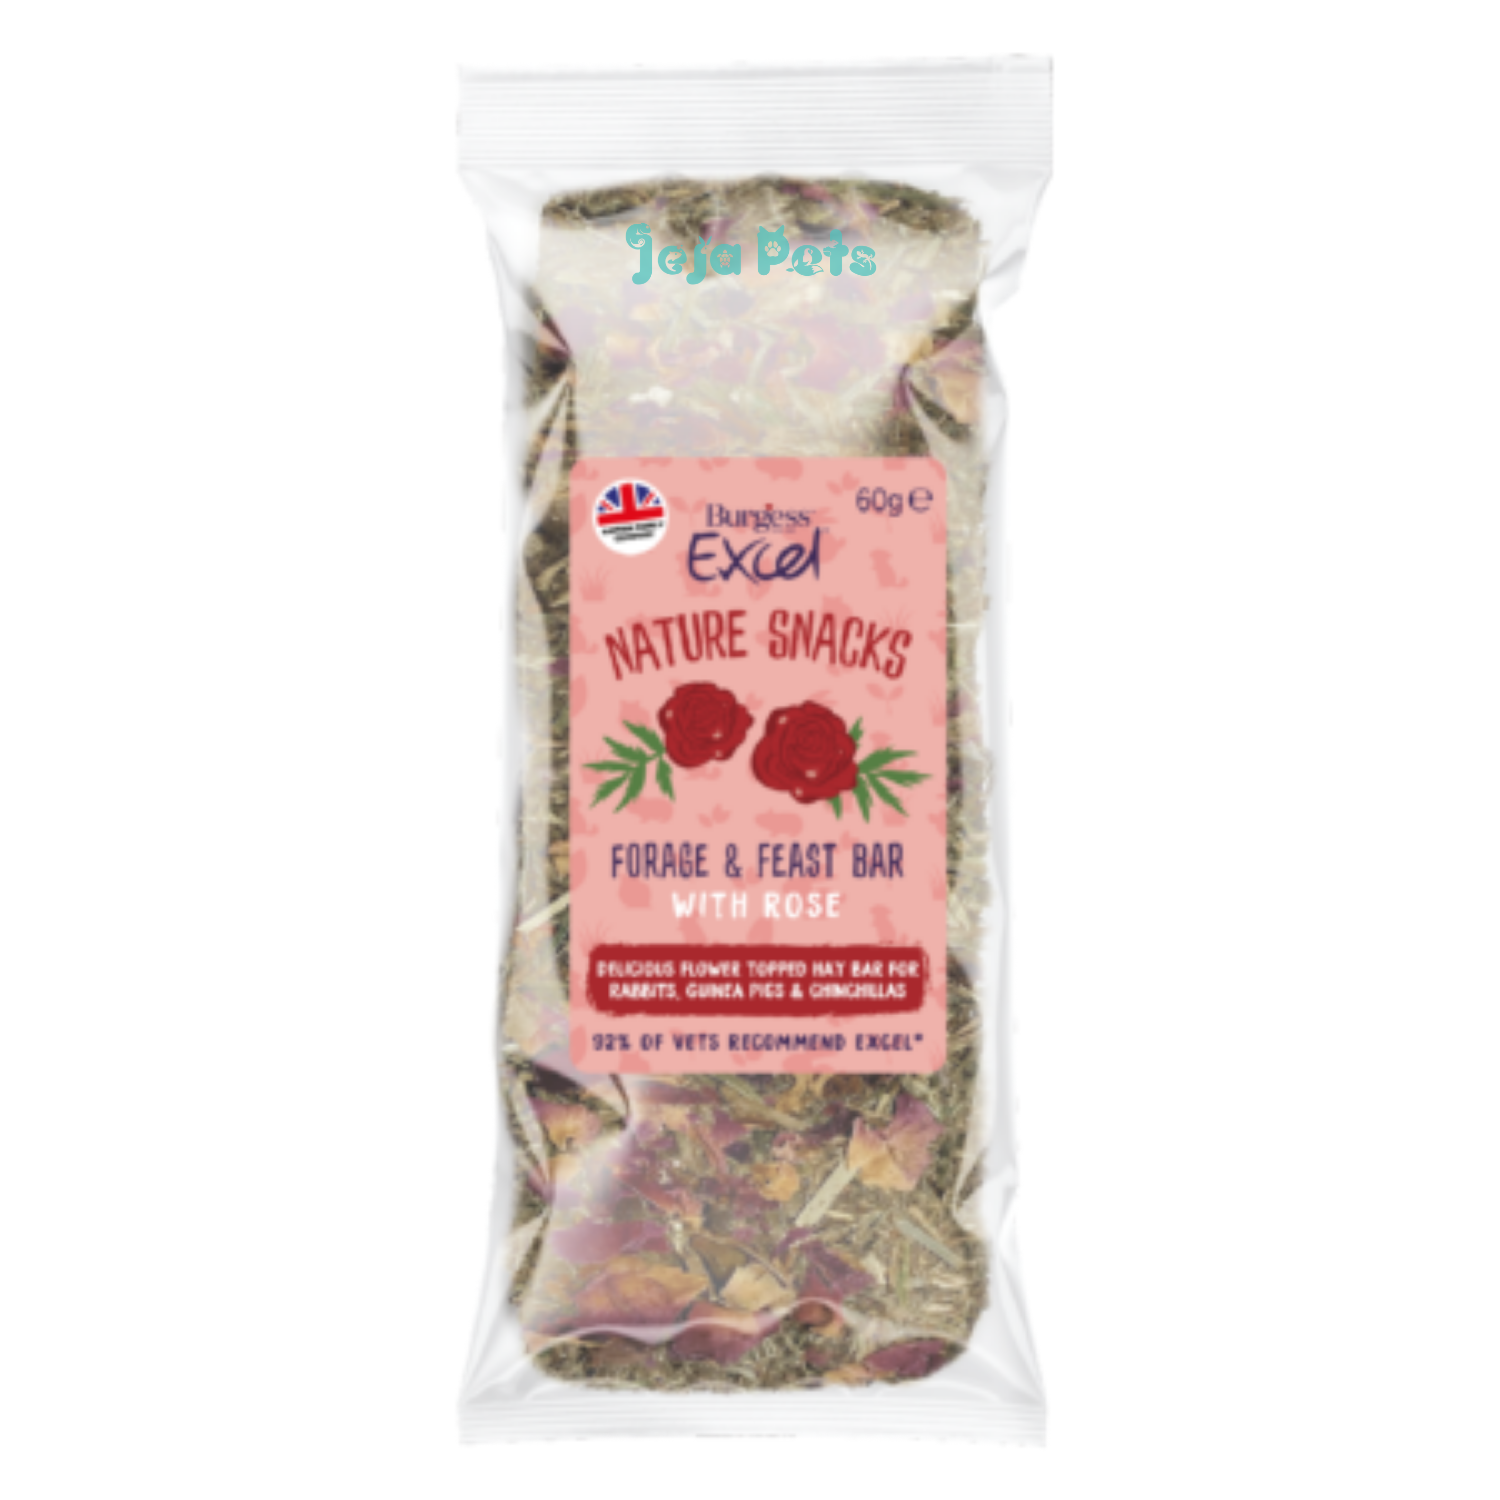 [PREORDER] Burgess Excel Forage & Feast Hay Bar with Rose - 60g